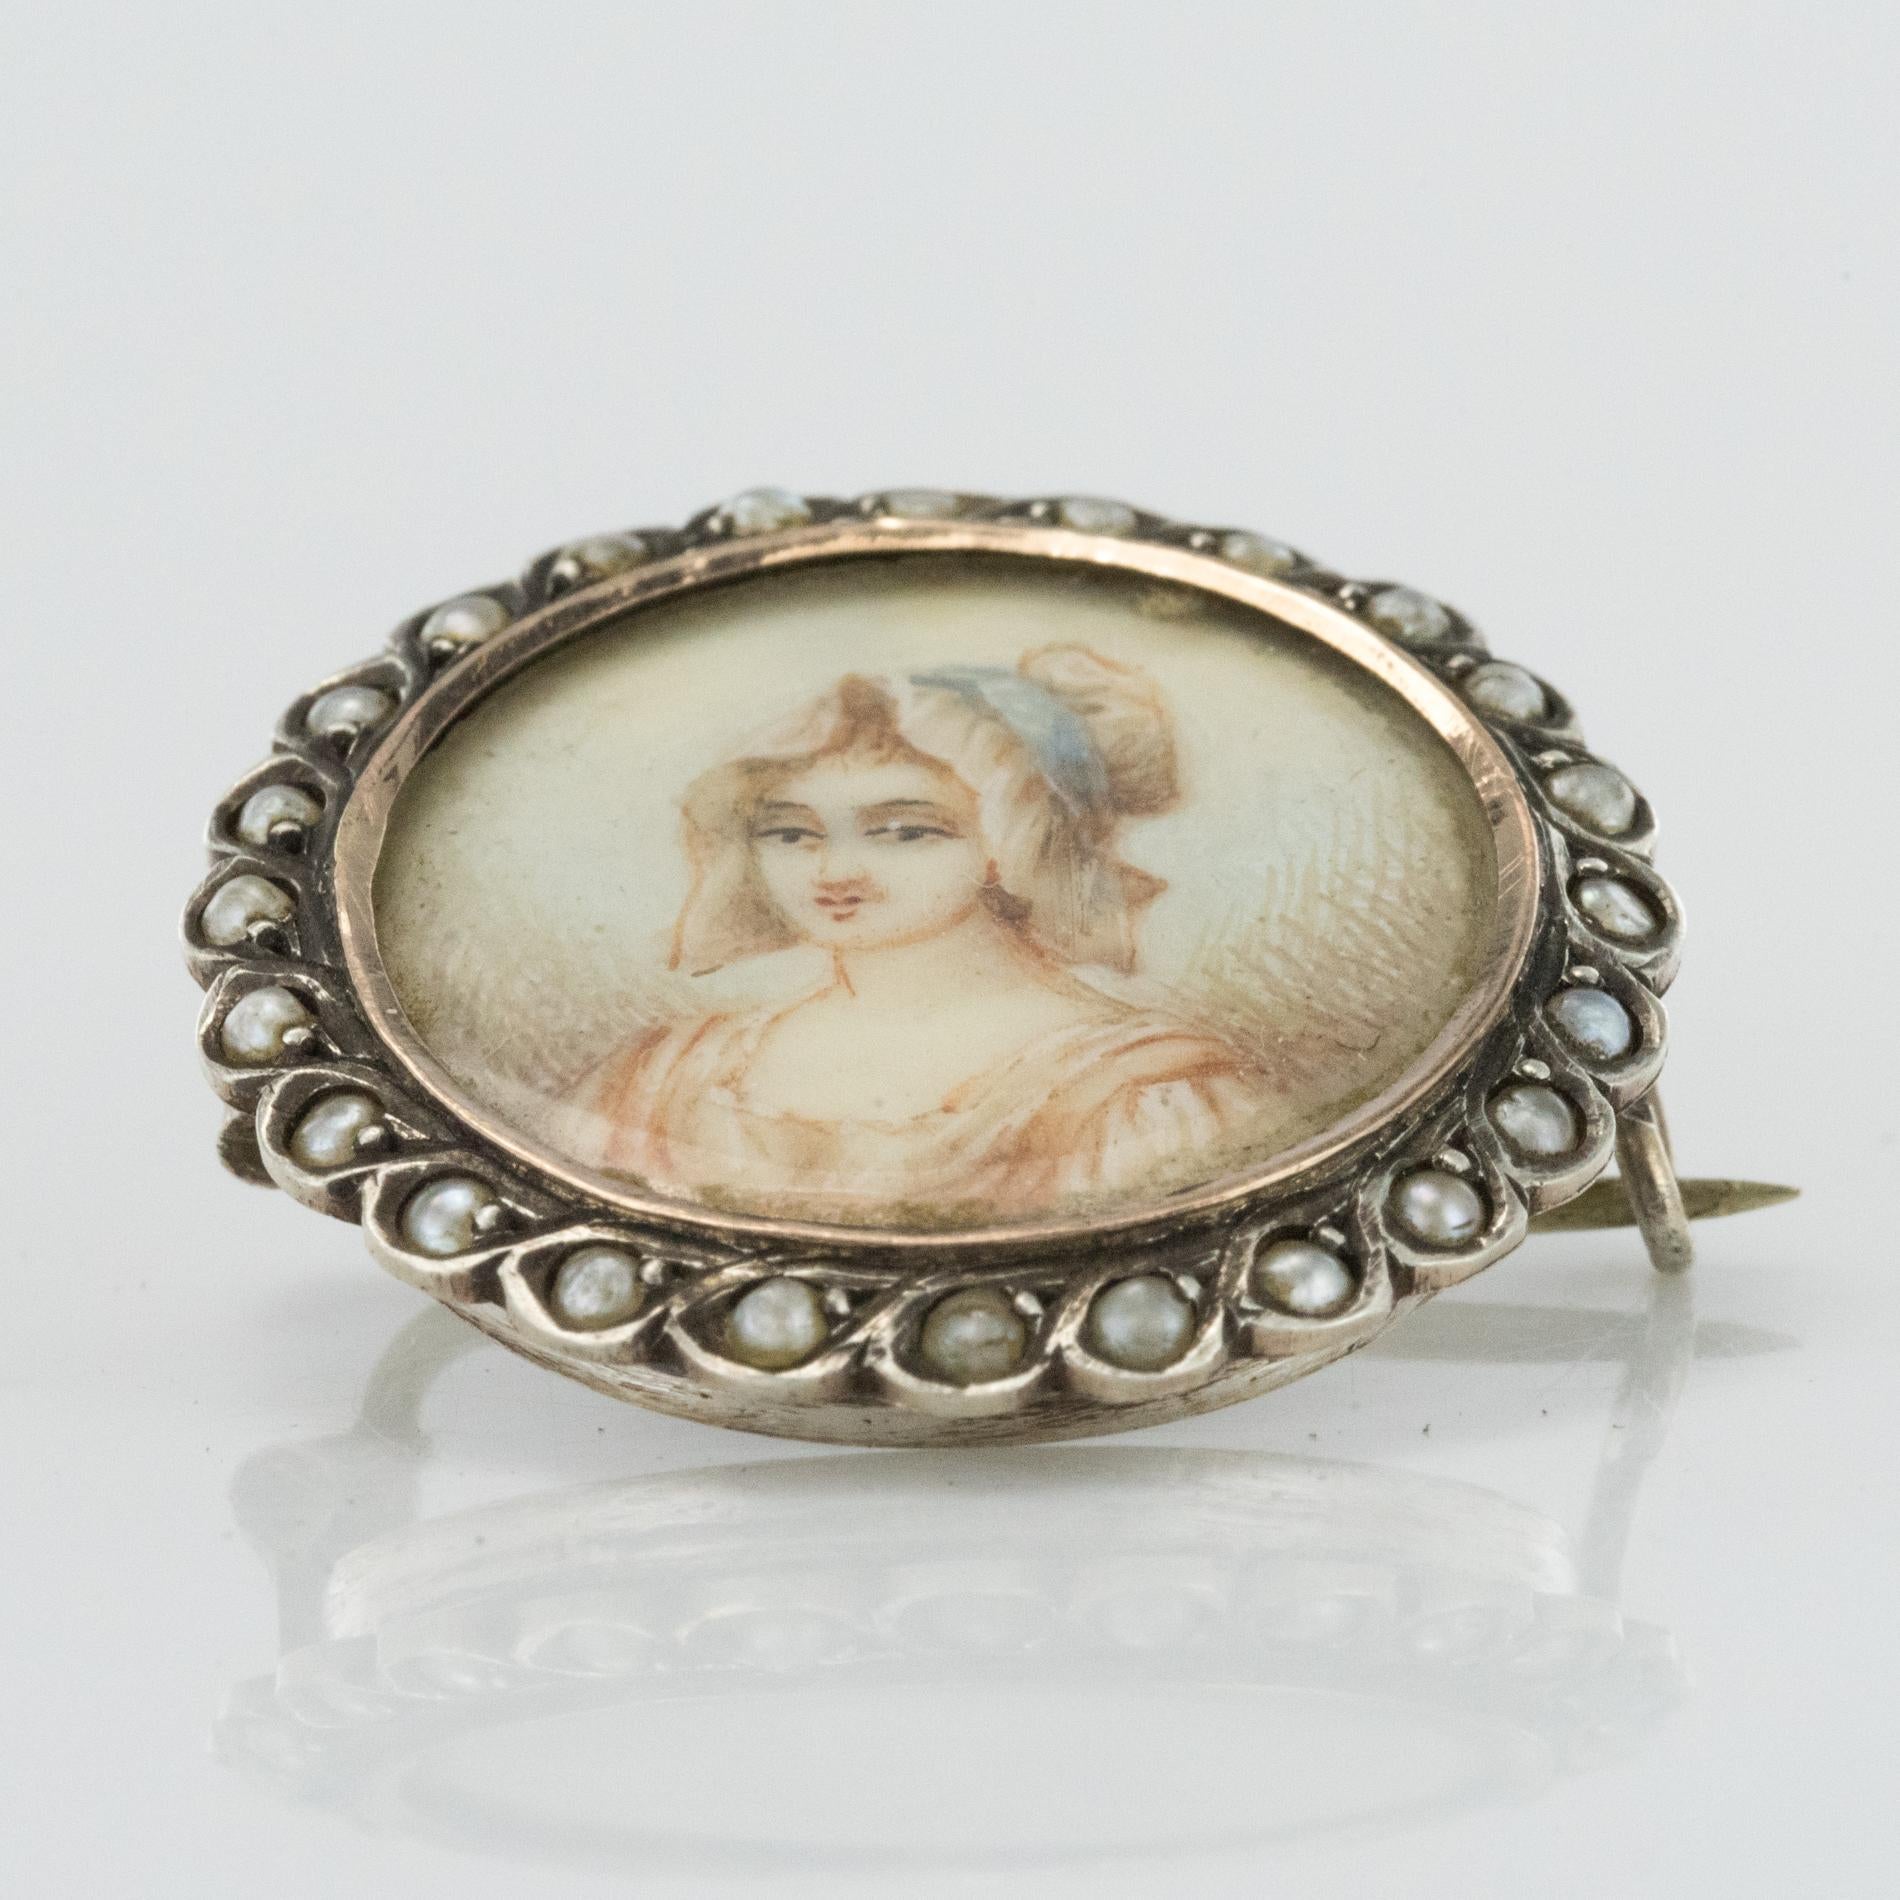 19th Century Miniature and Pearls on Silver Brooch For Sale 5